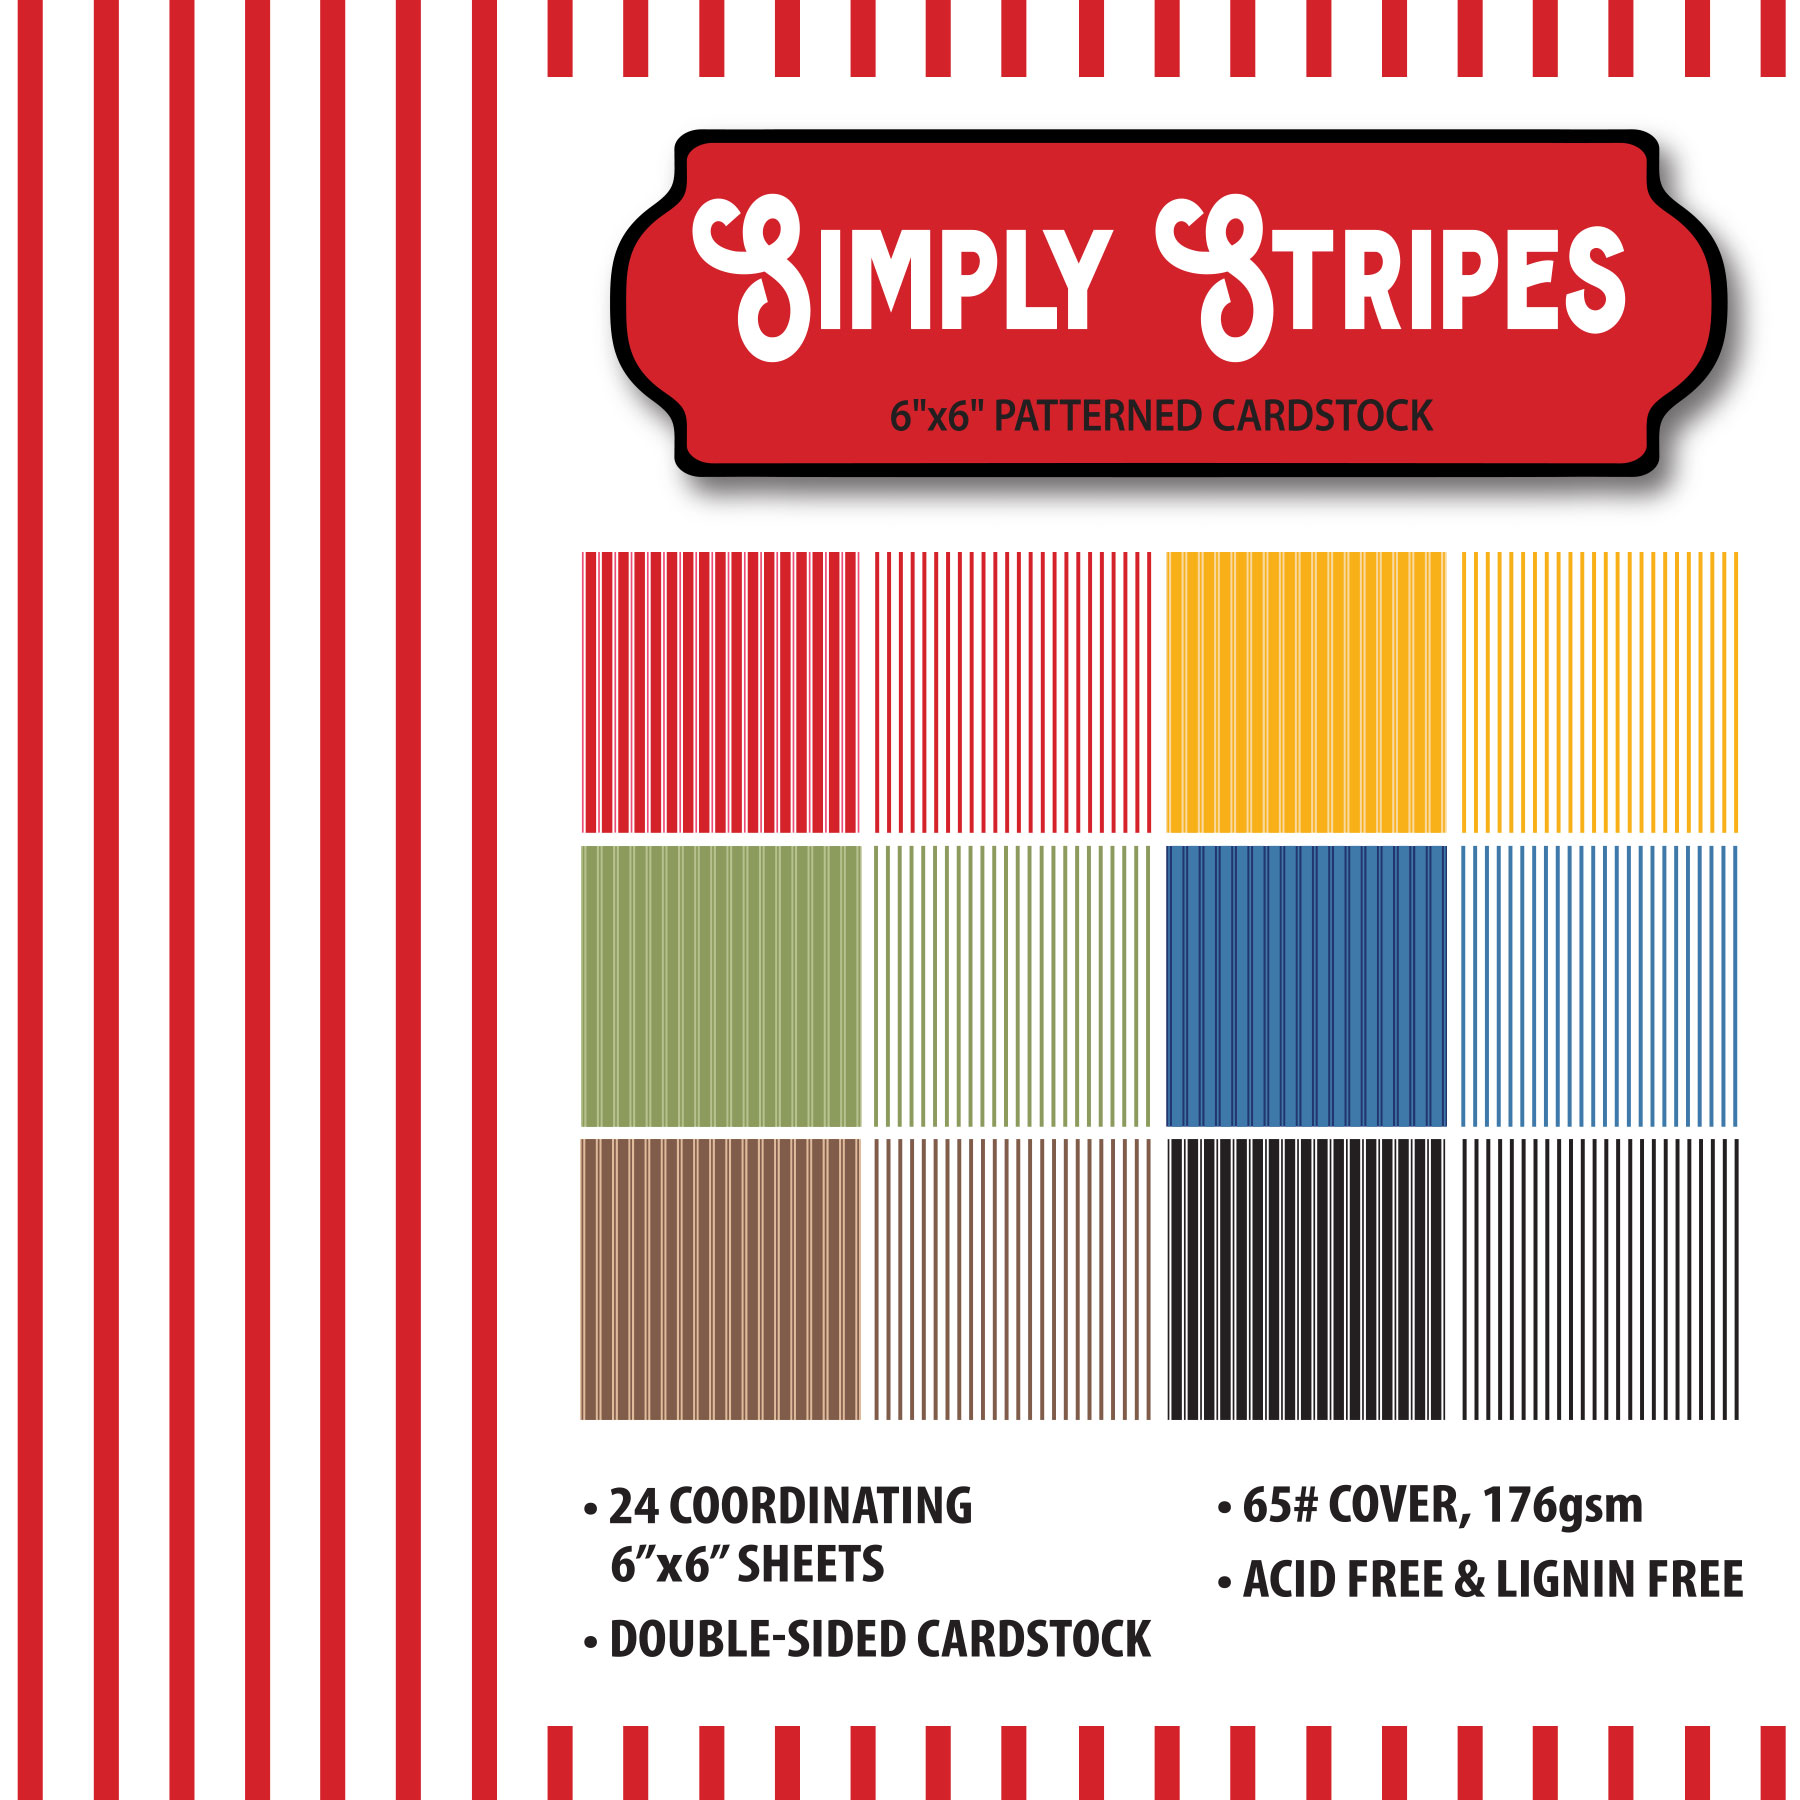 Simply Stripes 6x6 Patterned Cardstock